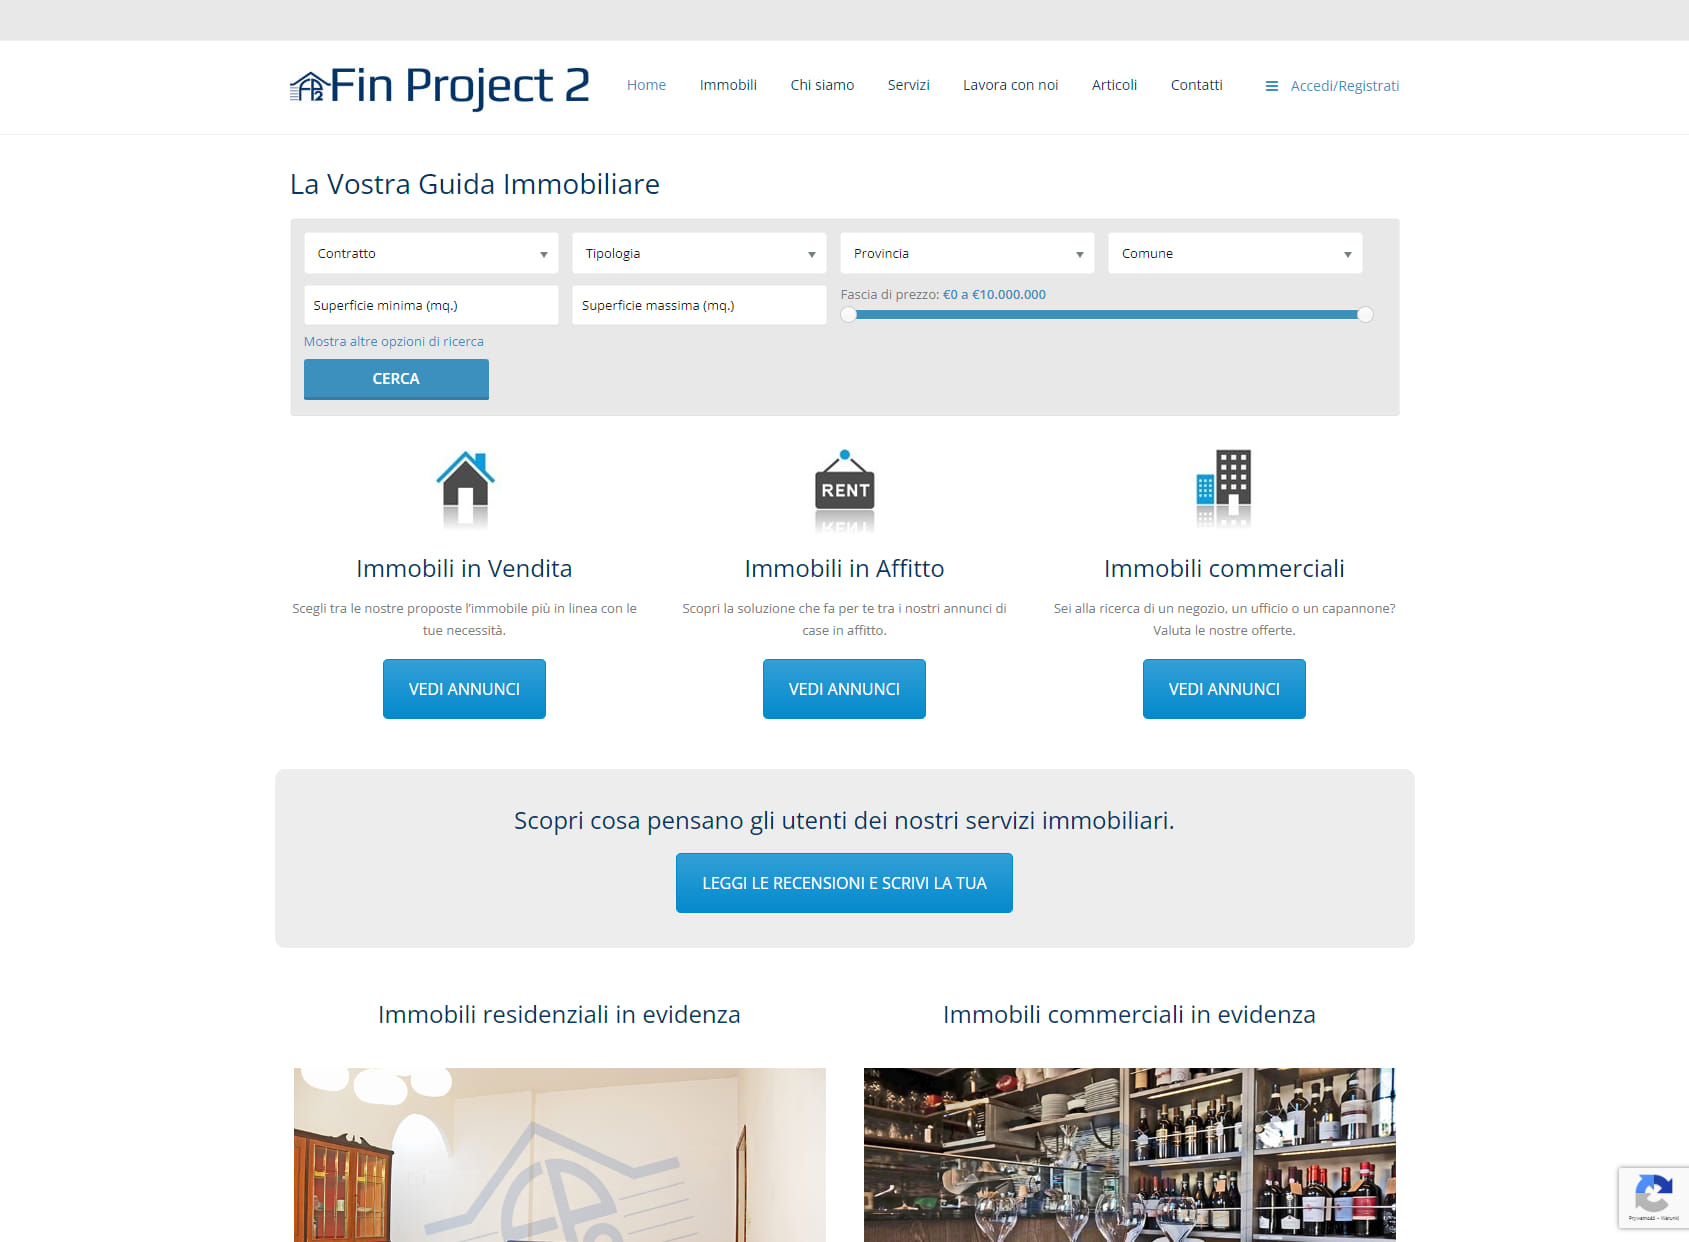 Fin Project 2